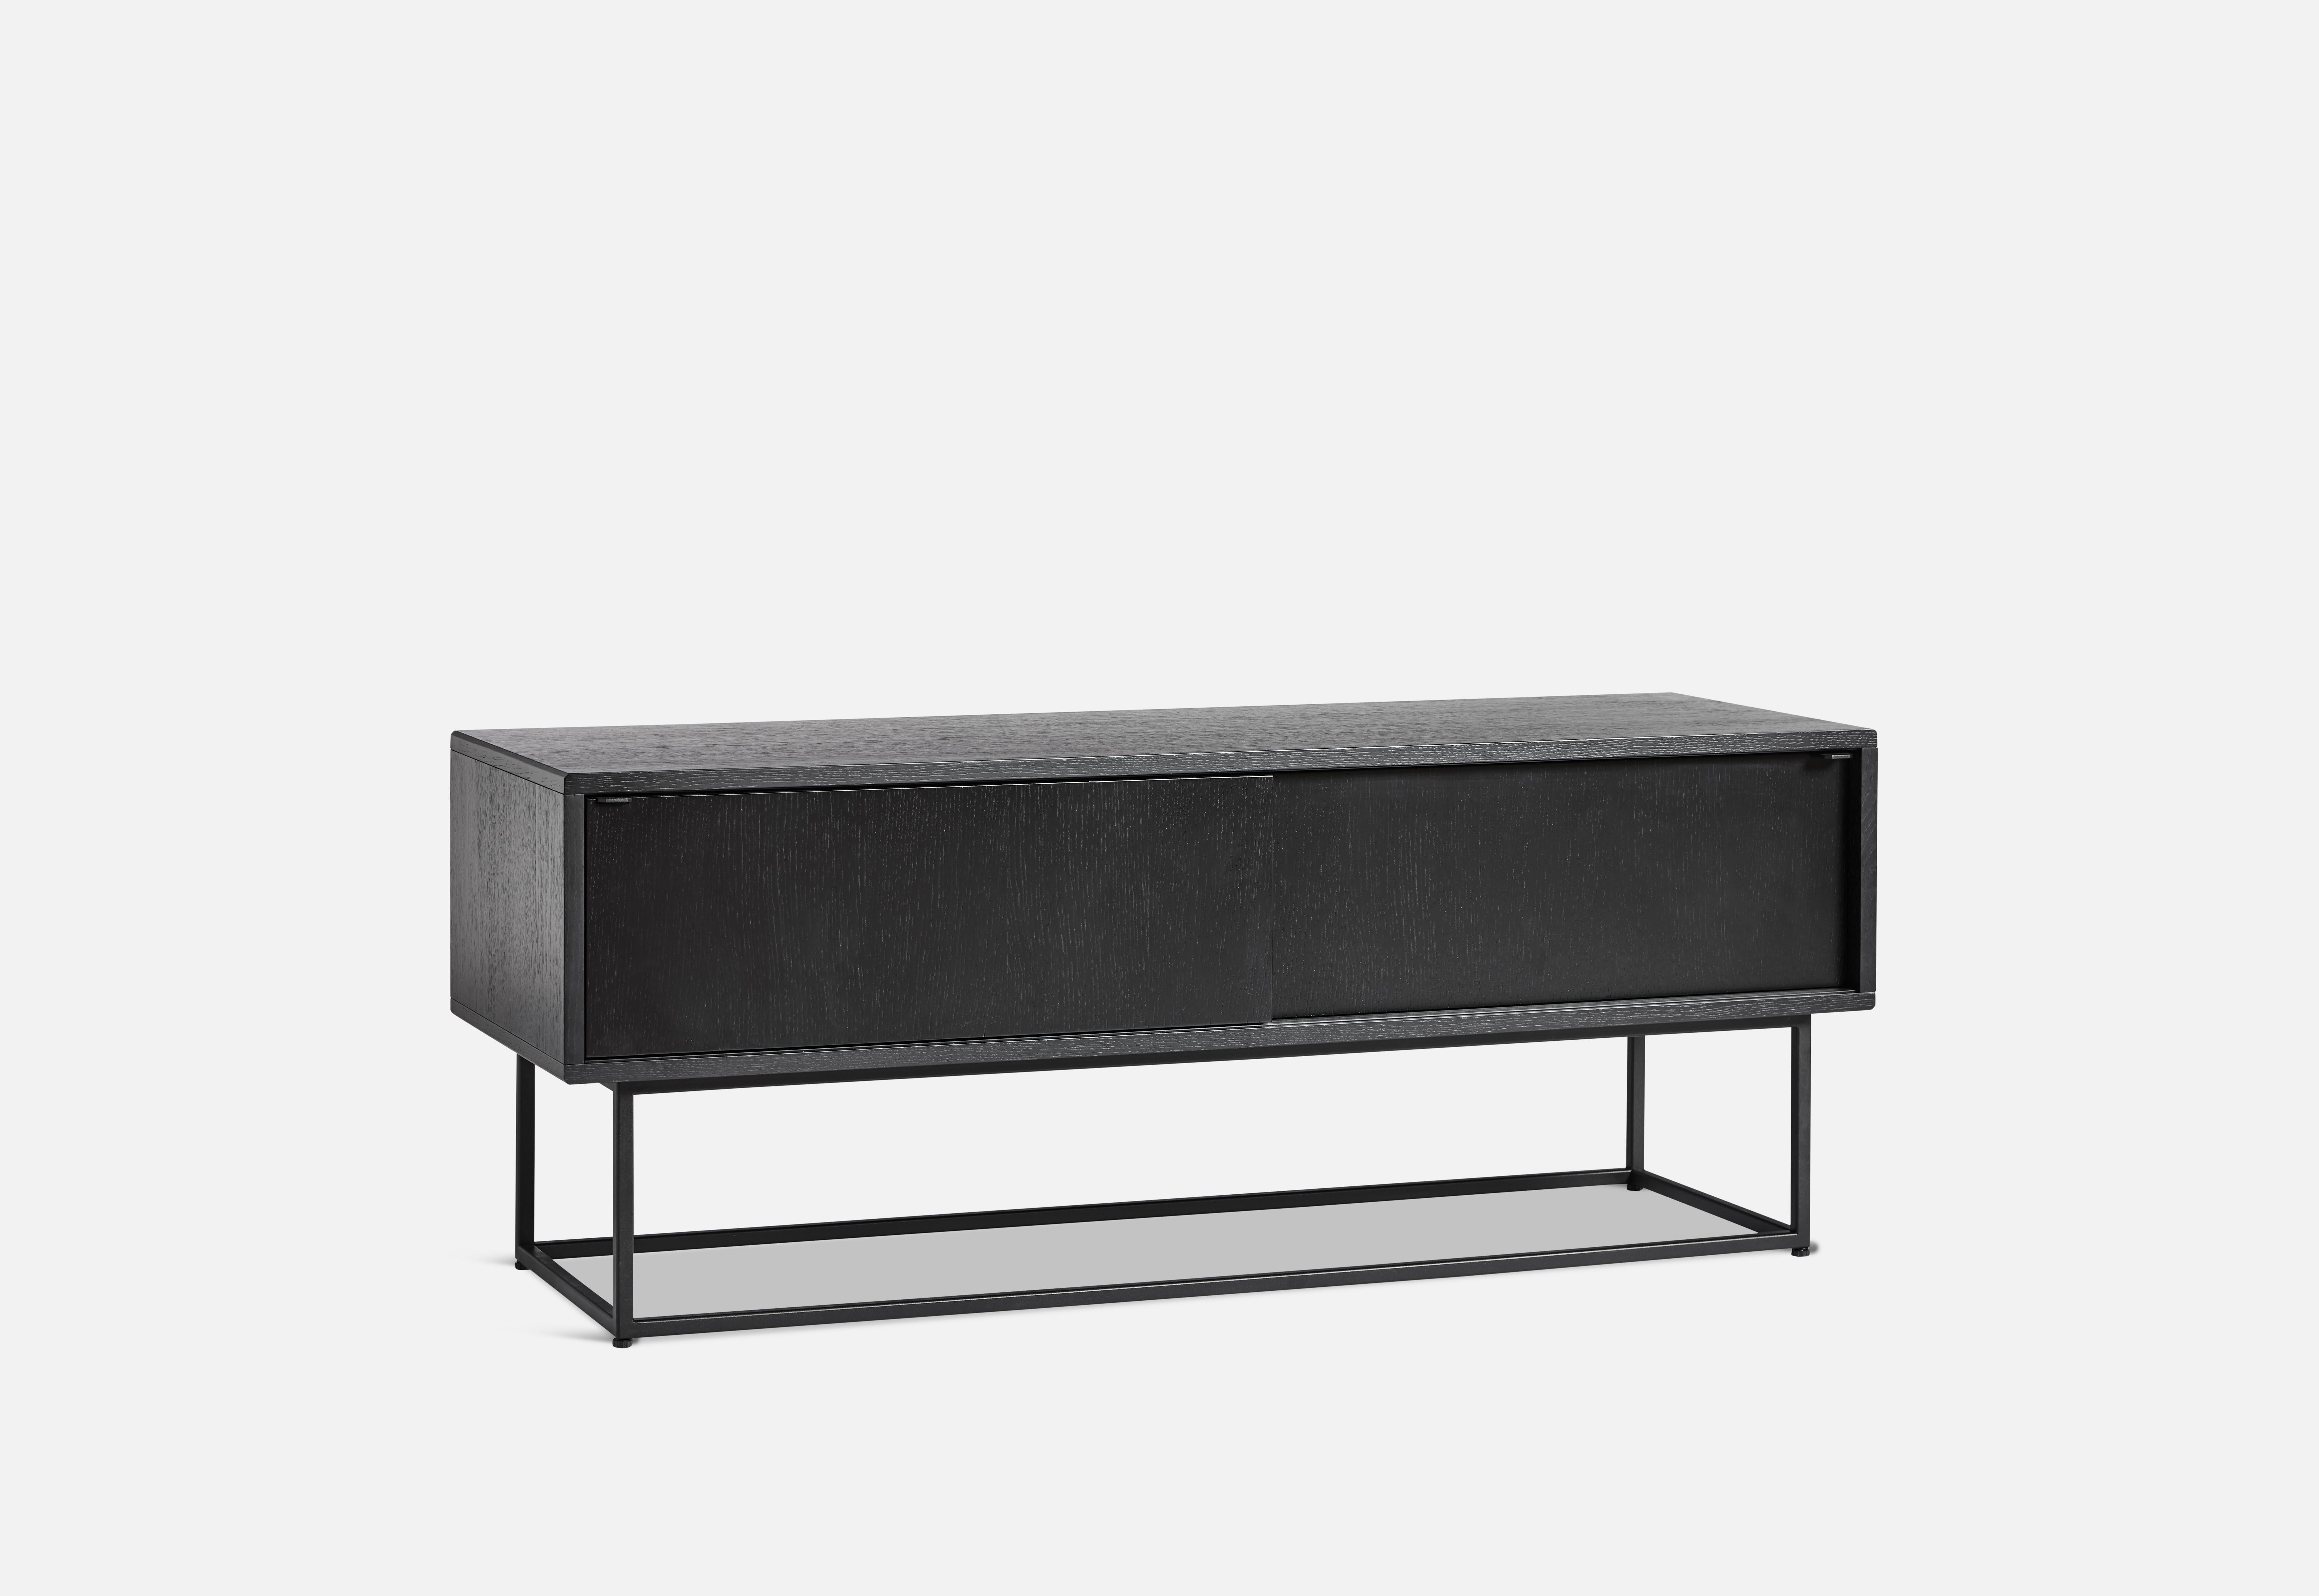 Black oak virka low sideboard by Ropke Design and Moaak
Materials: Oak, metal.
Dimensions: D 40 x W 120 x H 47 cm
Also available in different colours and materials.

The founders, Mia and Torben Koed, decided to put their 30 years of experience